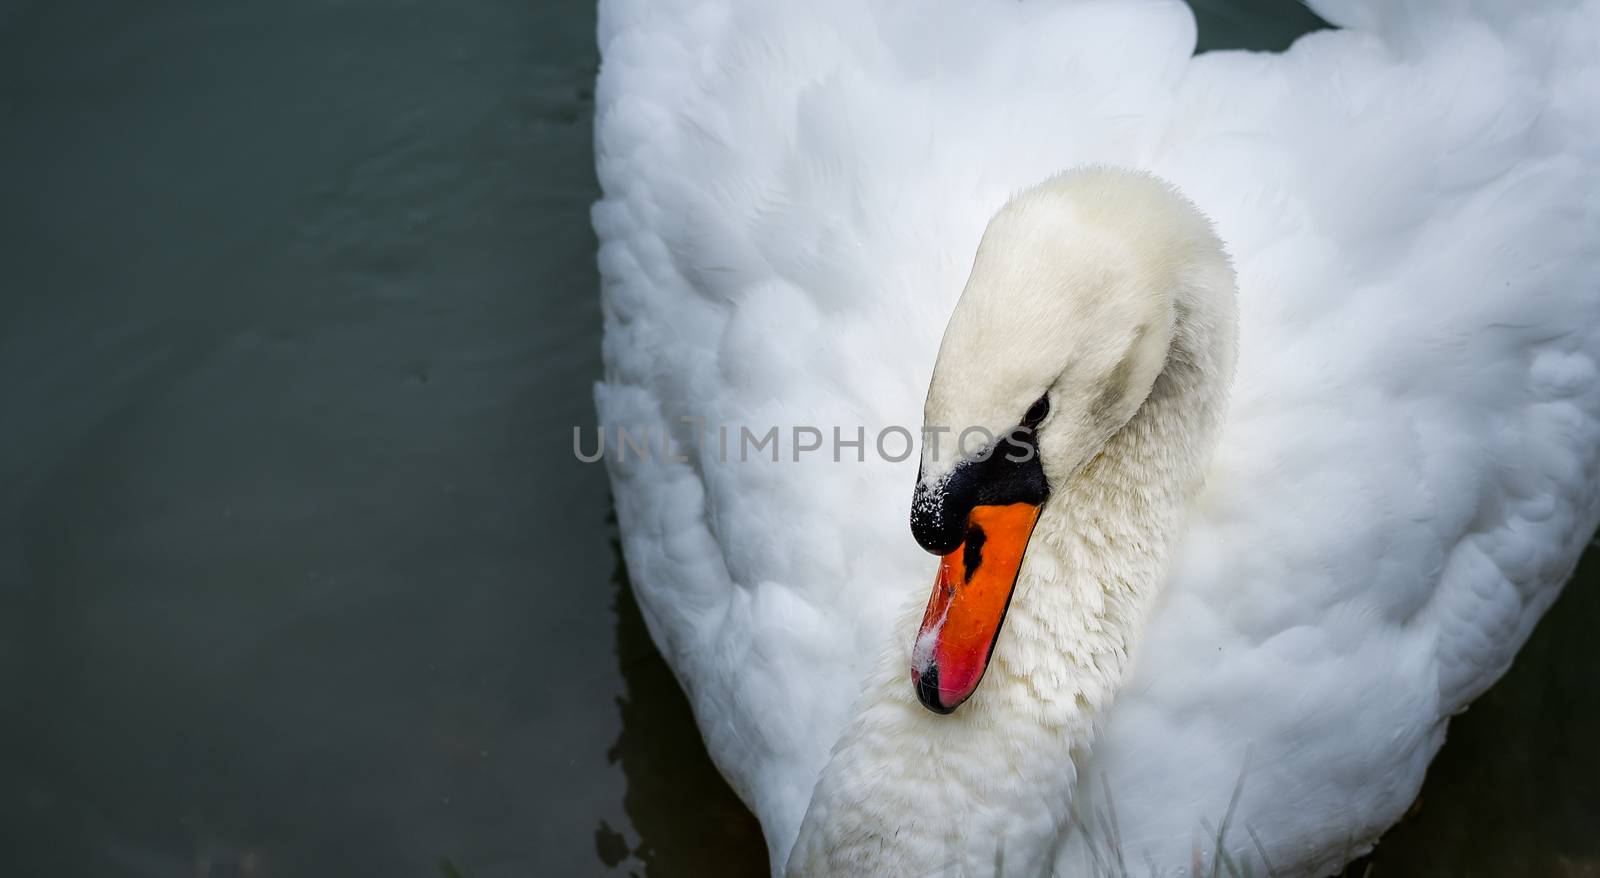 A lone white swan swims about his pond getting close to the camera in his friendly curiosity.